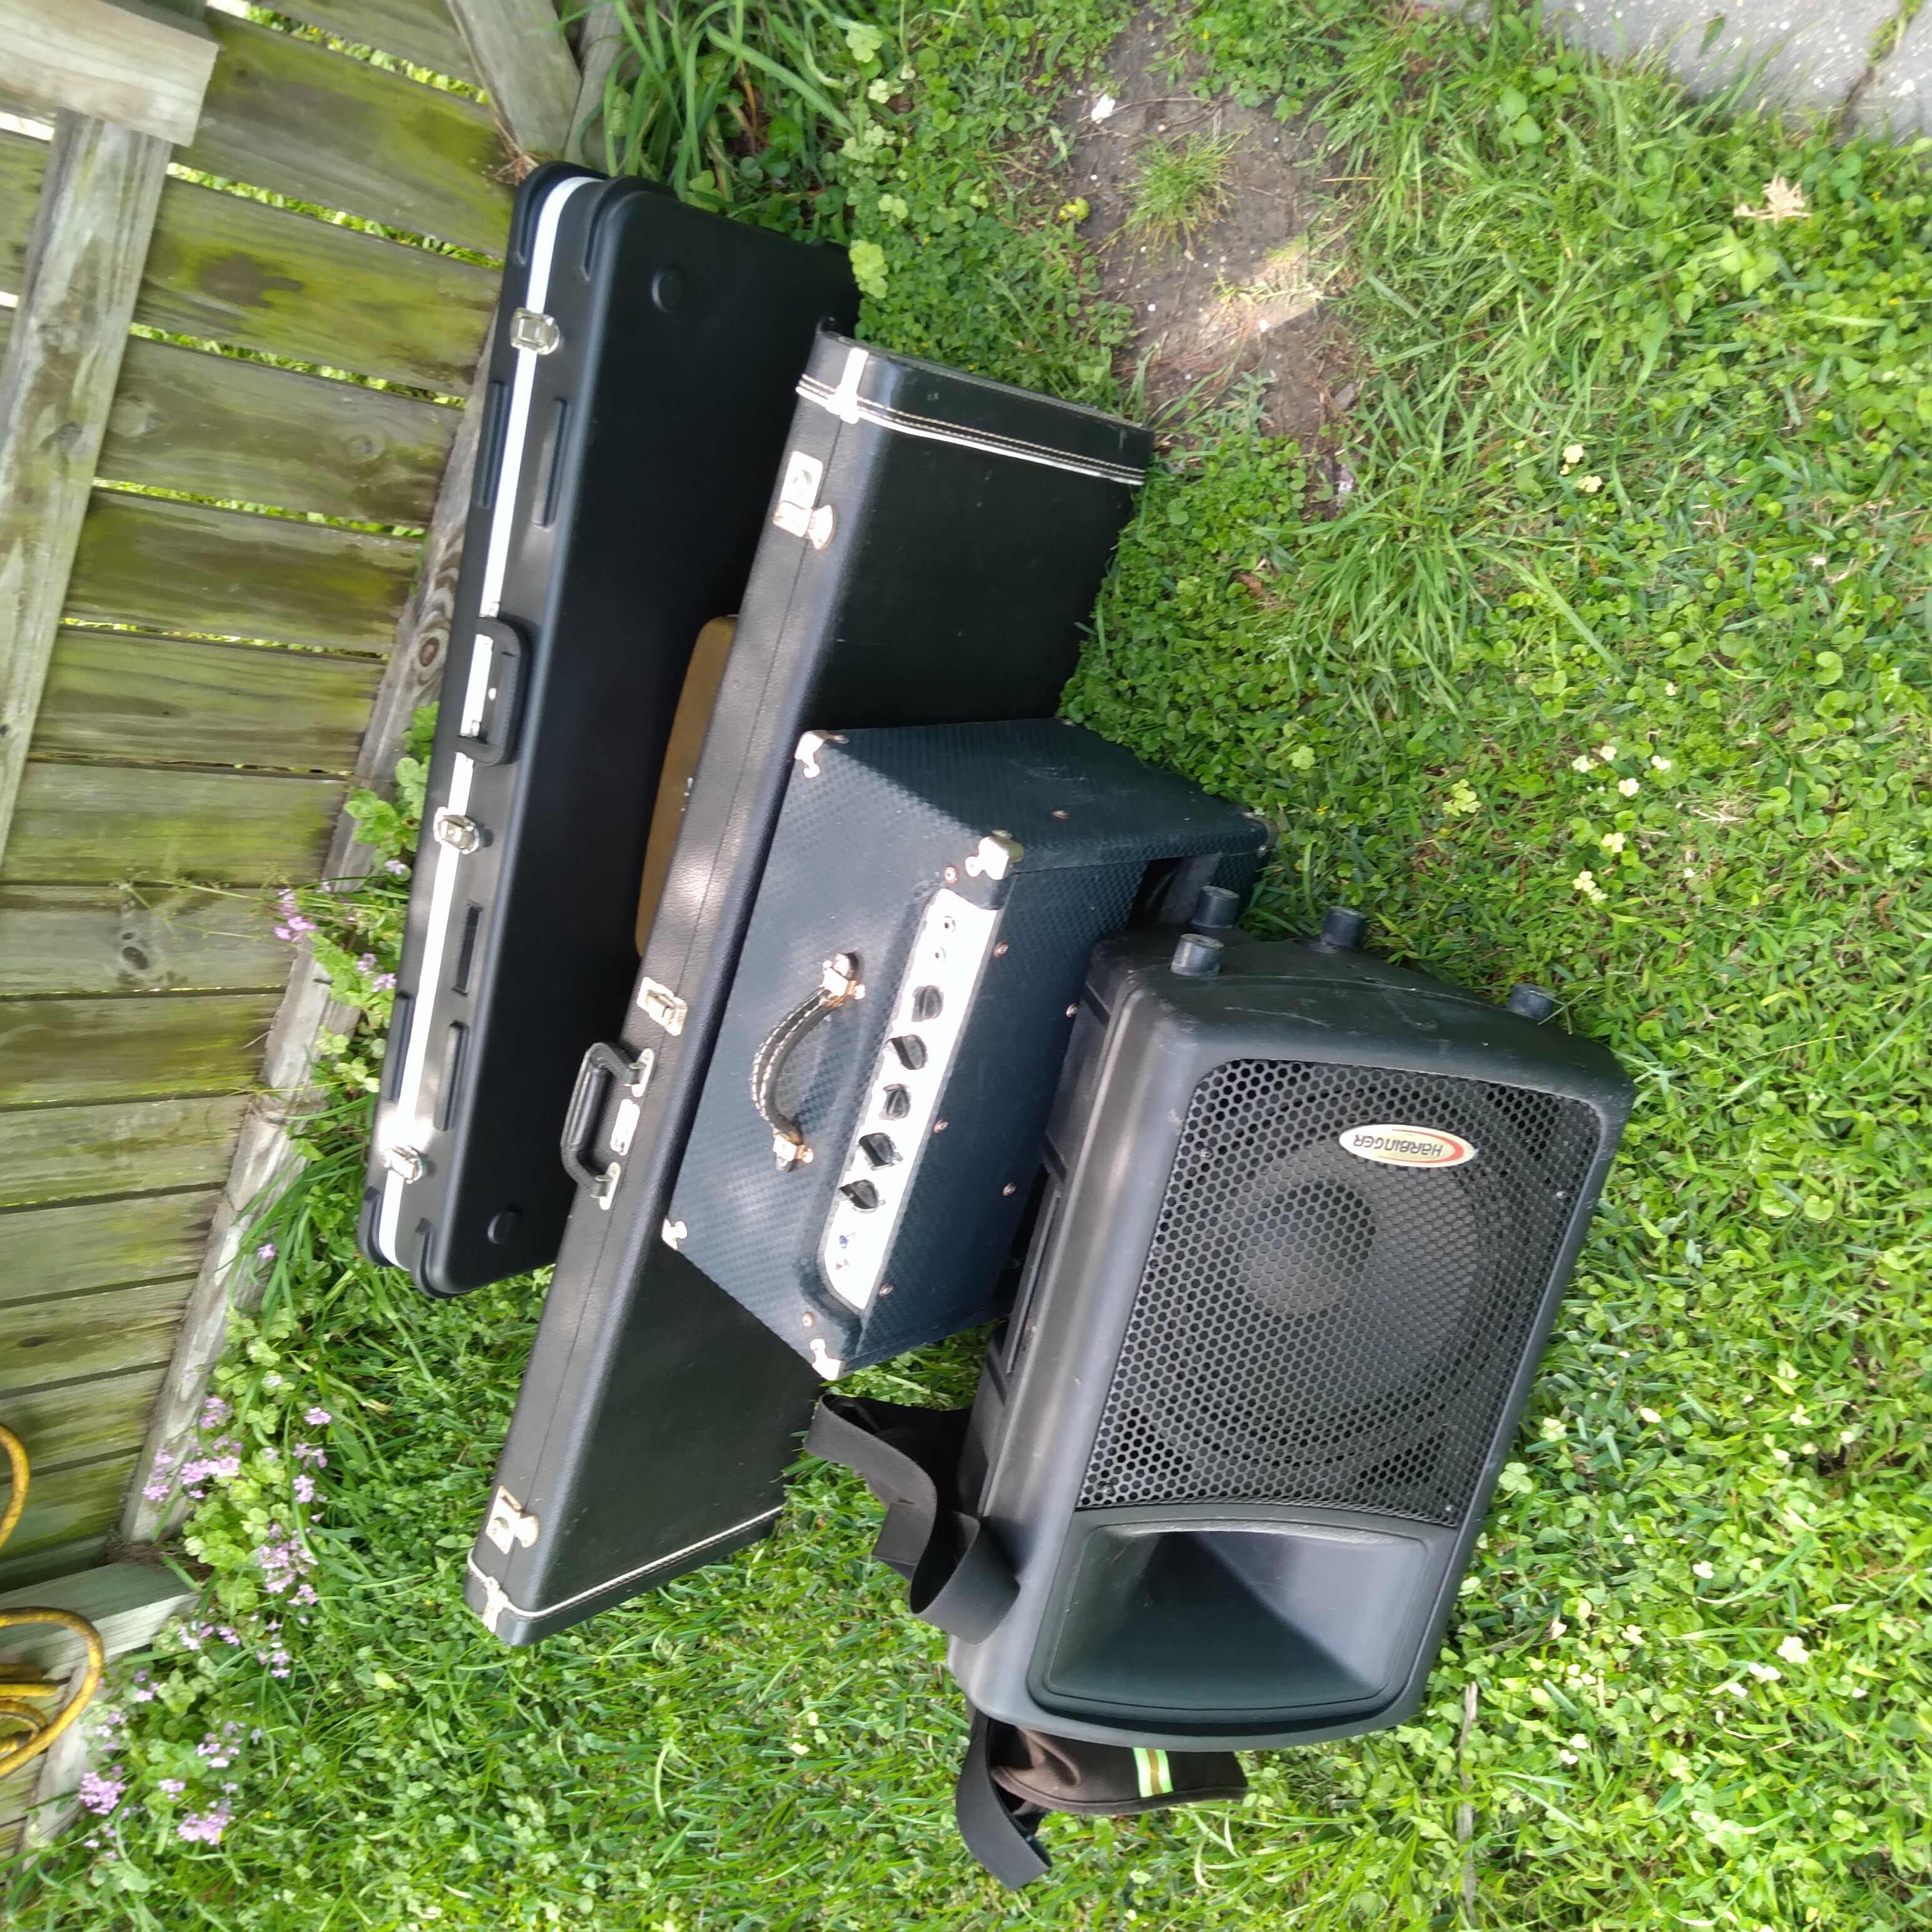 My musical gear, ready to go to the gig.